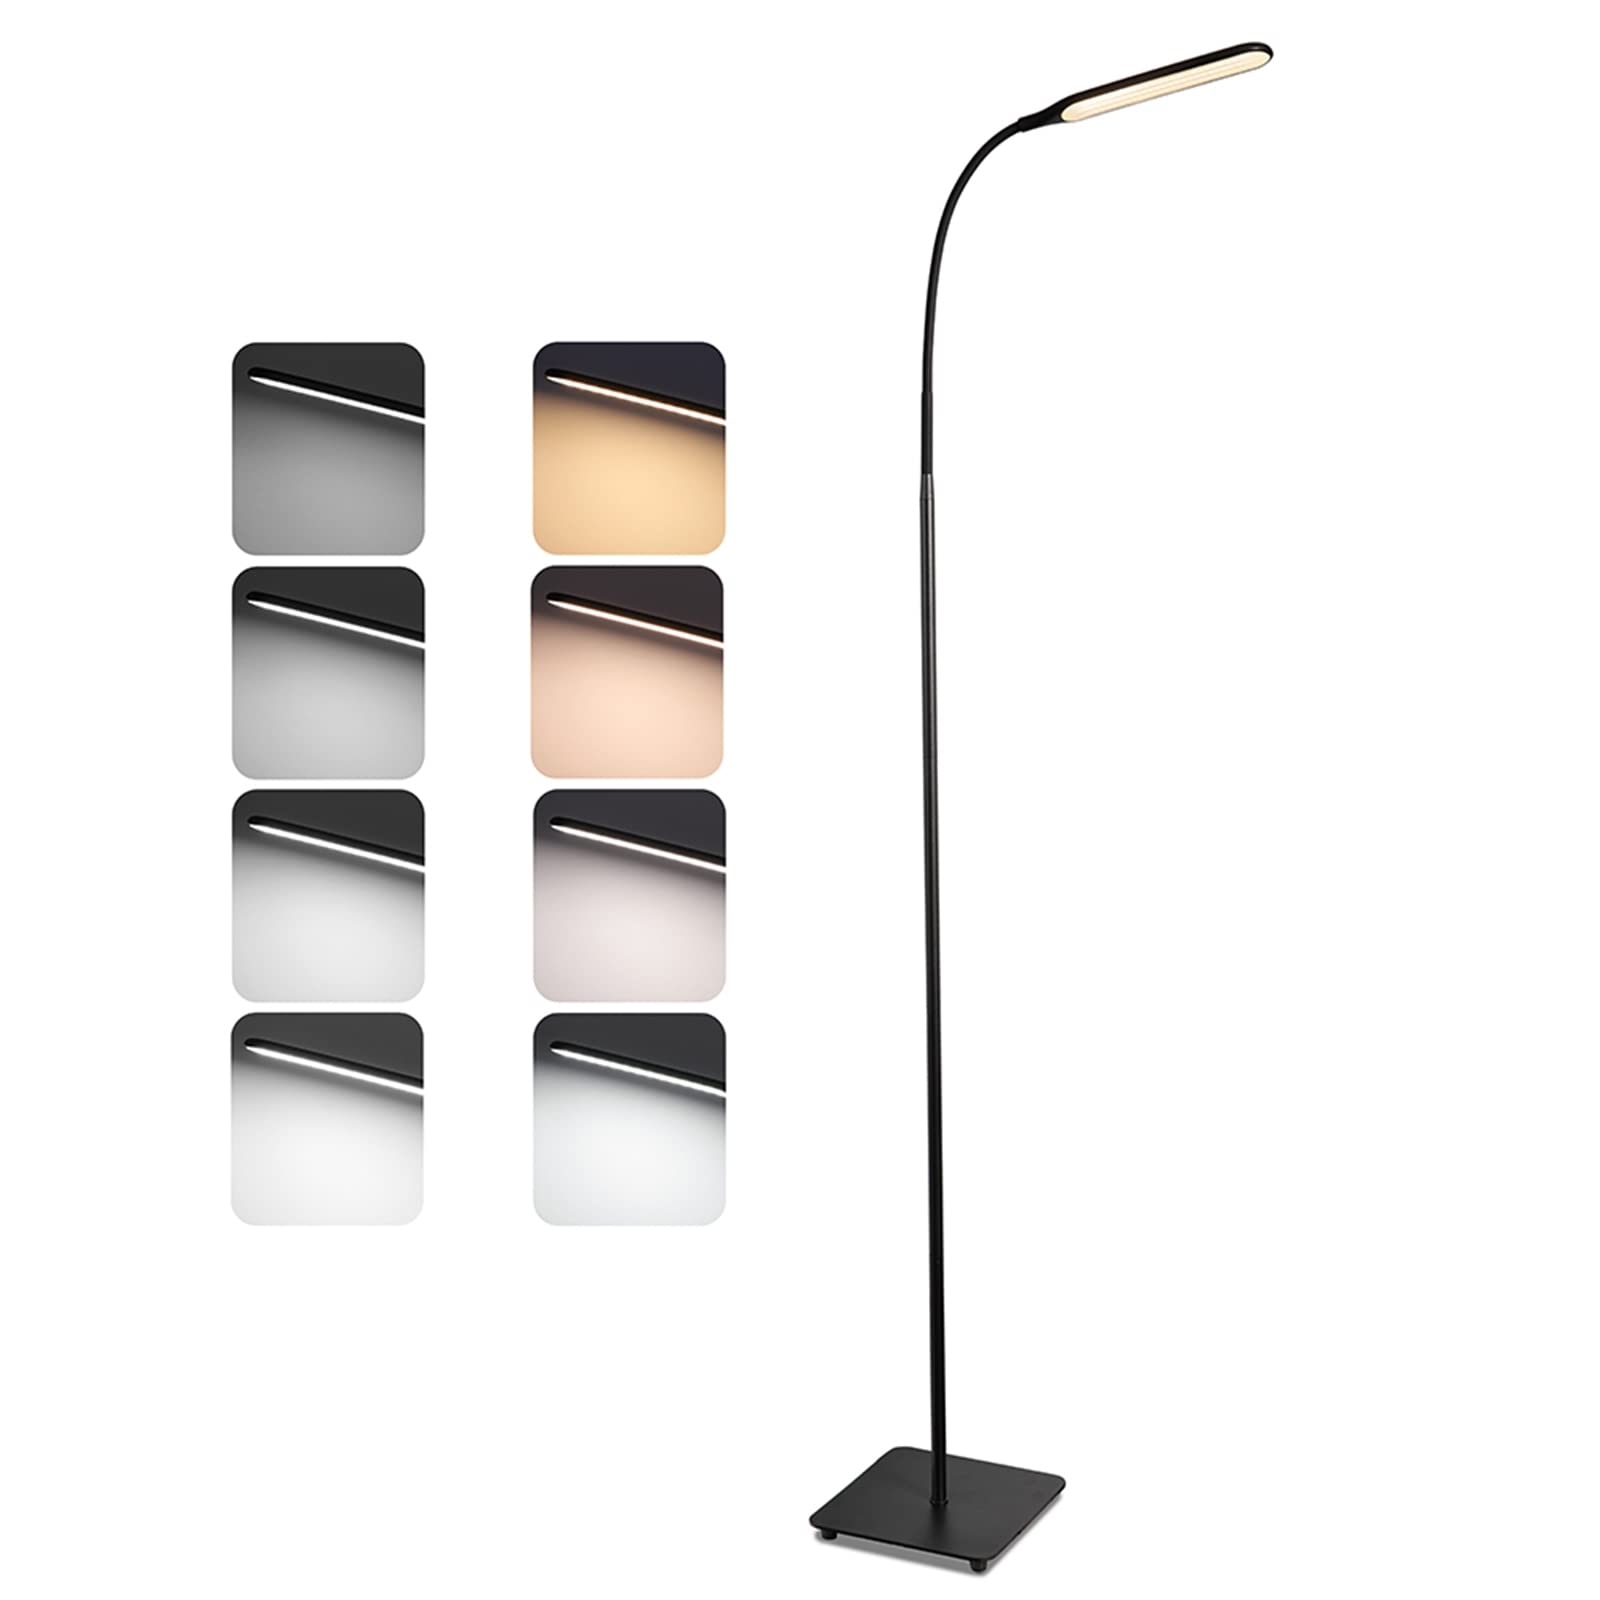 LED Floor Lamp, sympa Reading Lamp Floor Standing with 4 Colours & 4 Brightness Levels, Dimmable Floor Lamps for Living Room, Bedroom, Office Touch Control, Gooseneck Daylight Floor Lamp, 10W